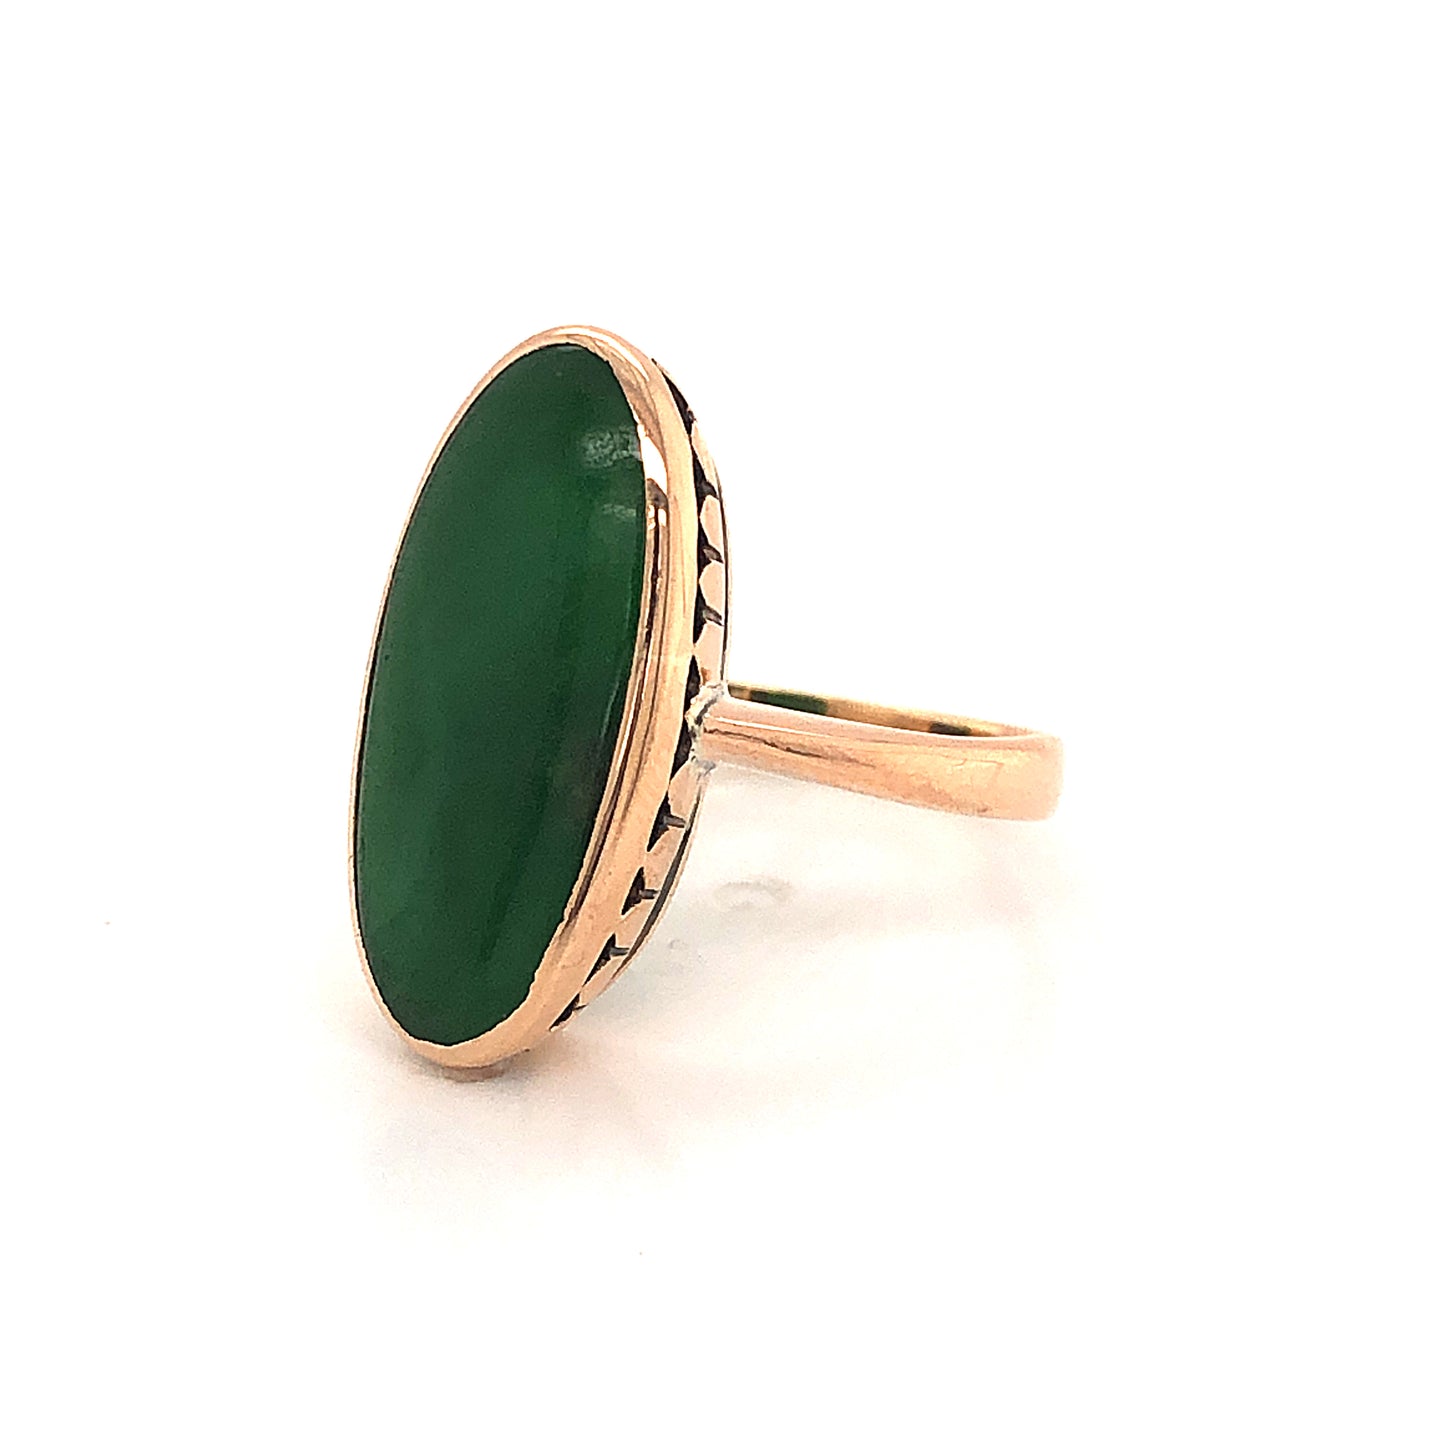 Mid-Century Elongated Oval Jade Ring in 14k Yellow Gold